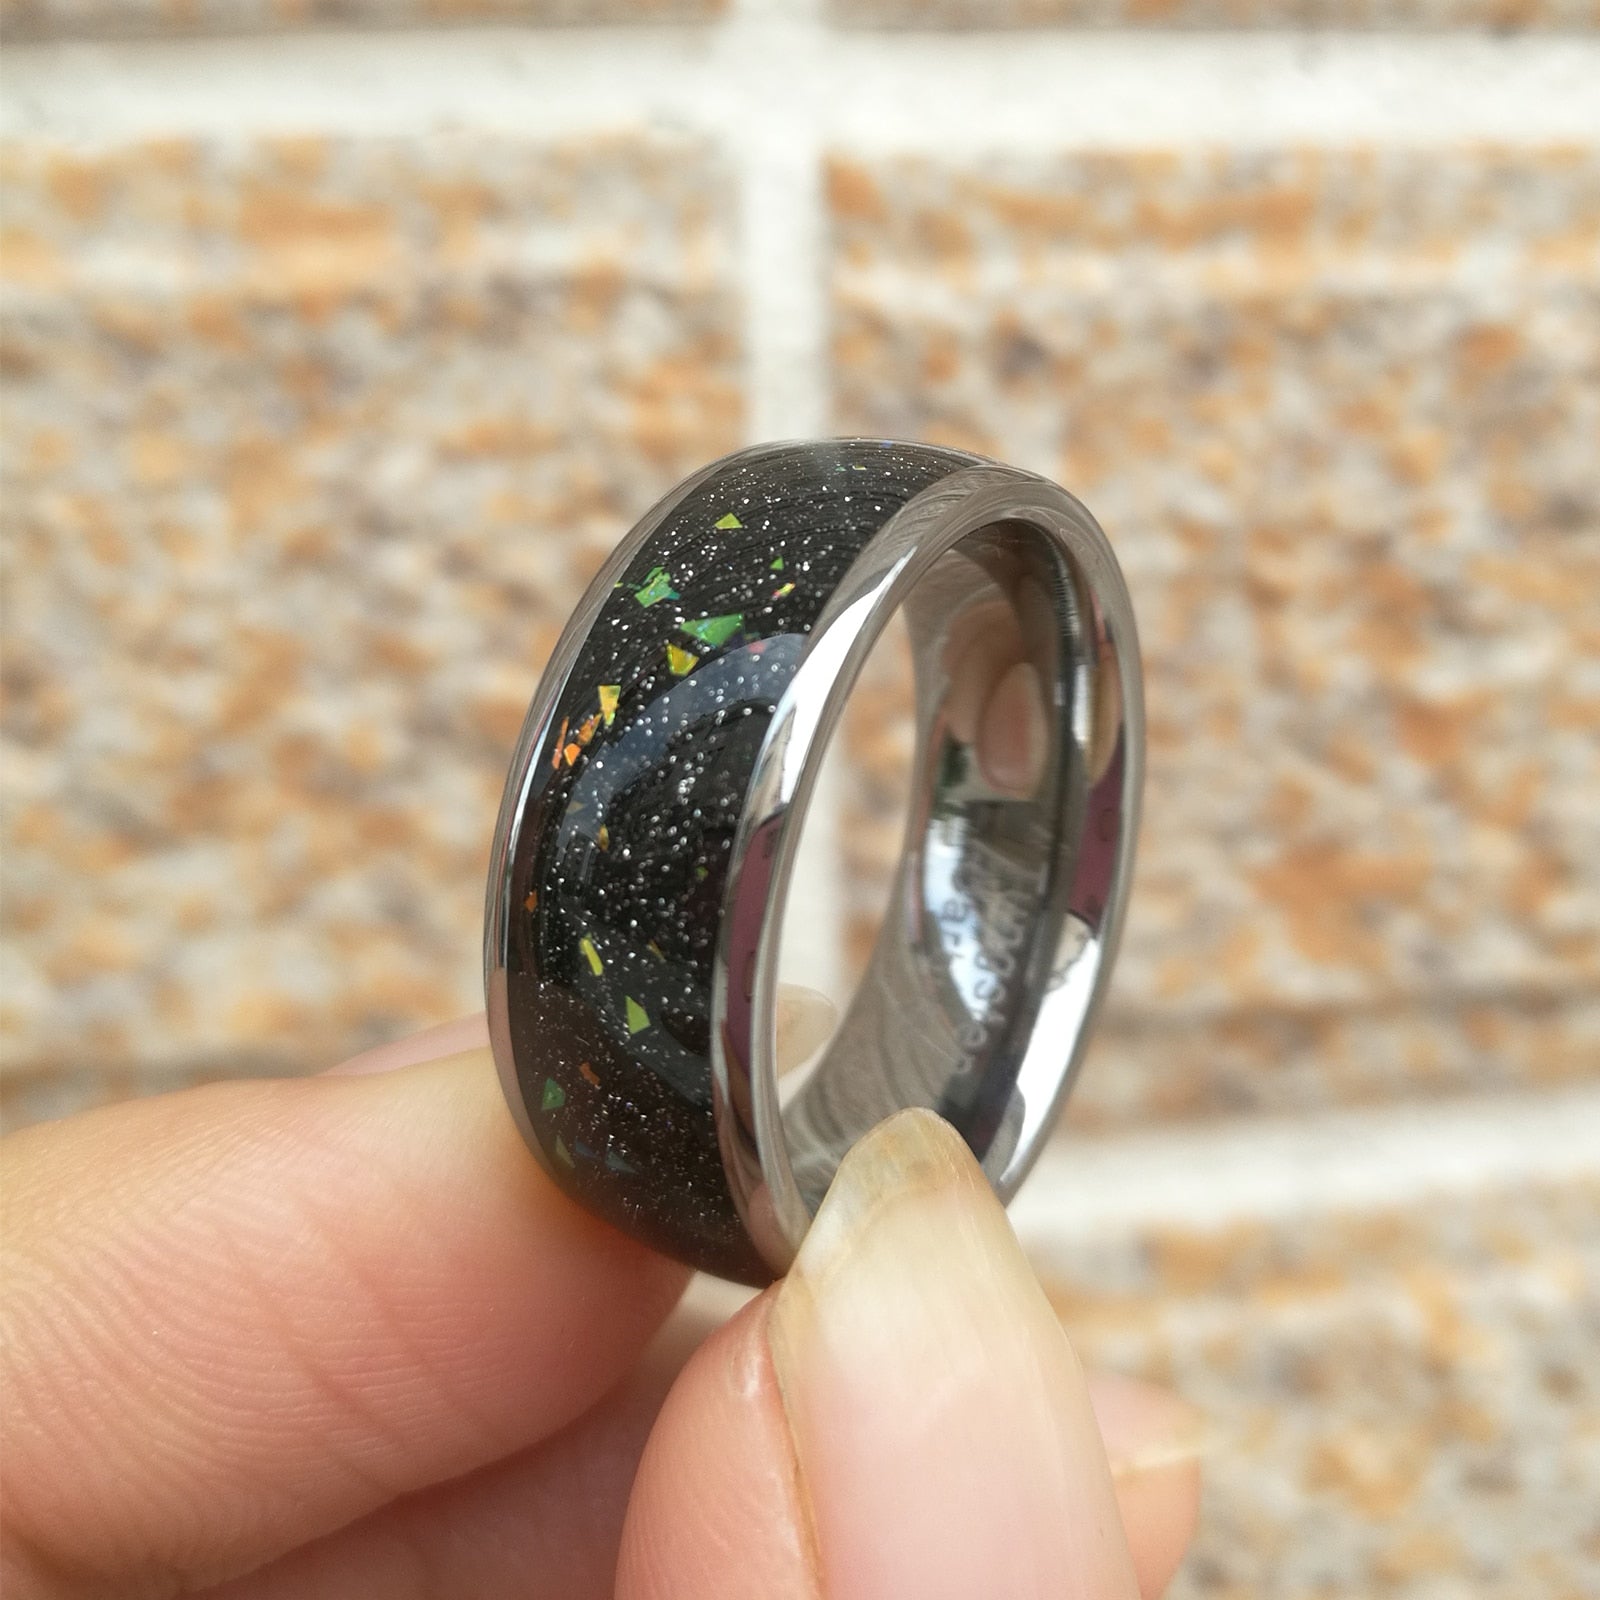 8mm Colorful Fragments Inlay Black Tungsten Unisex Ring